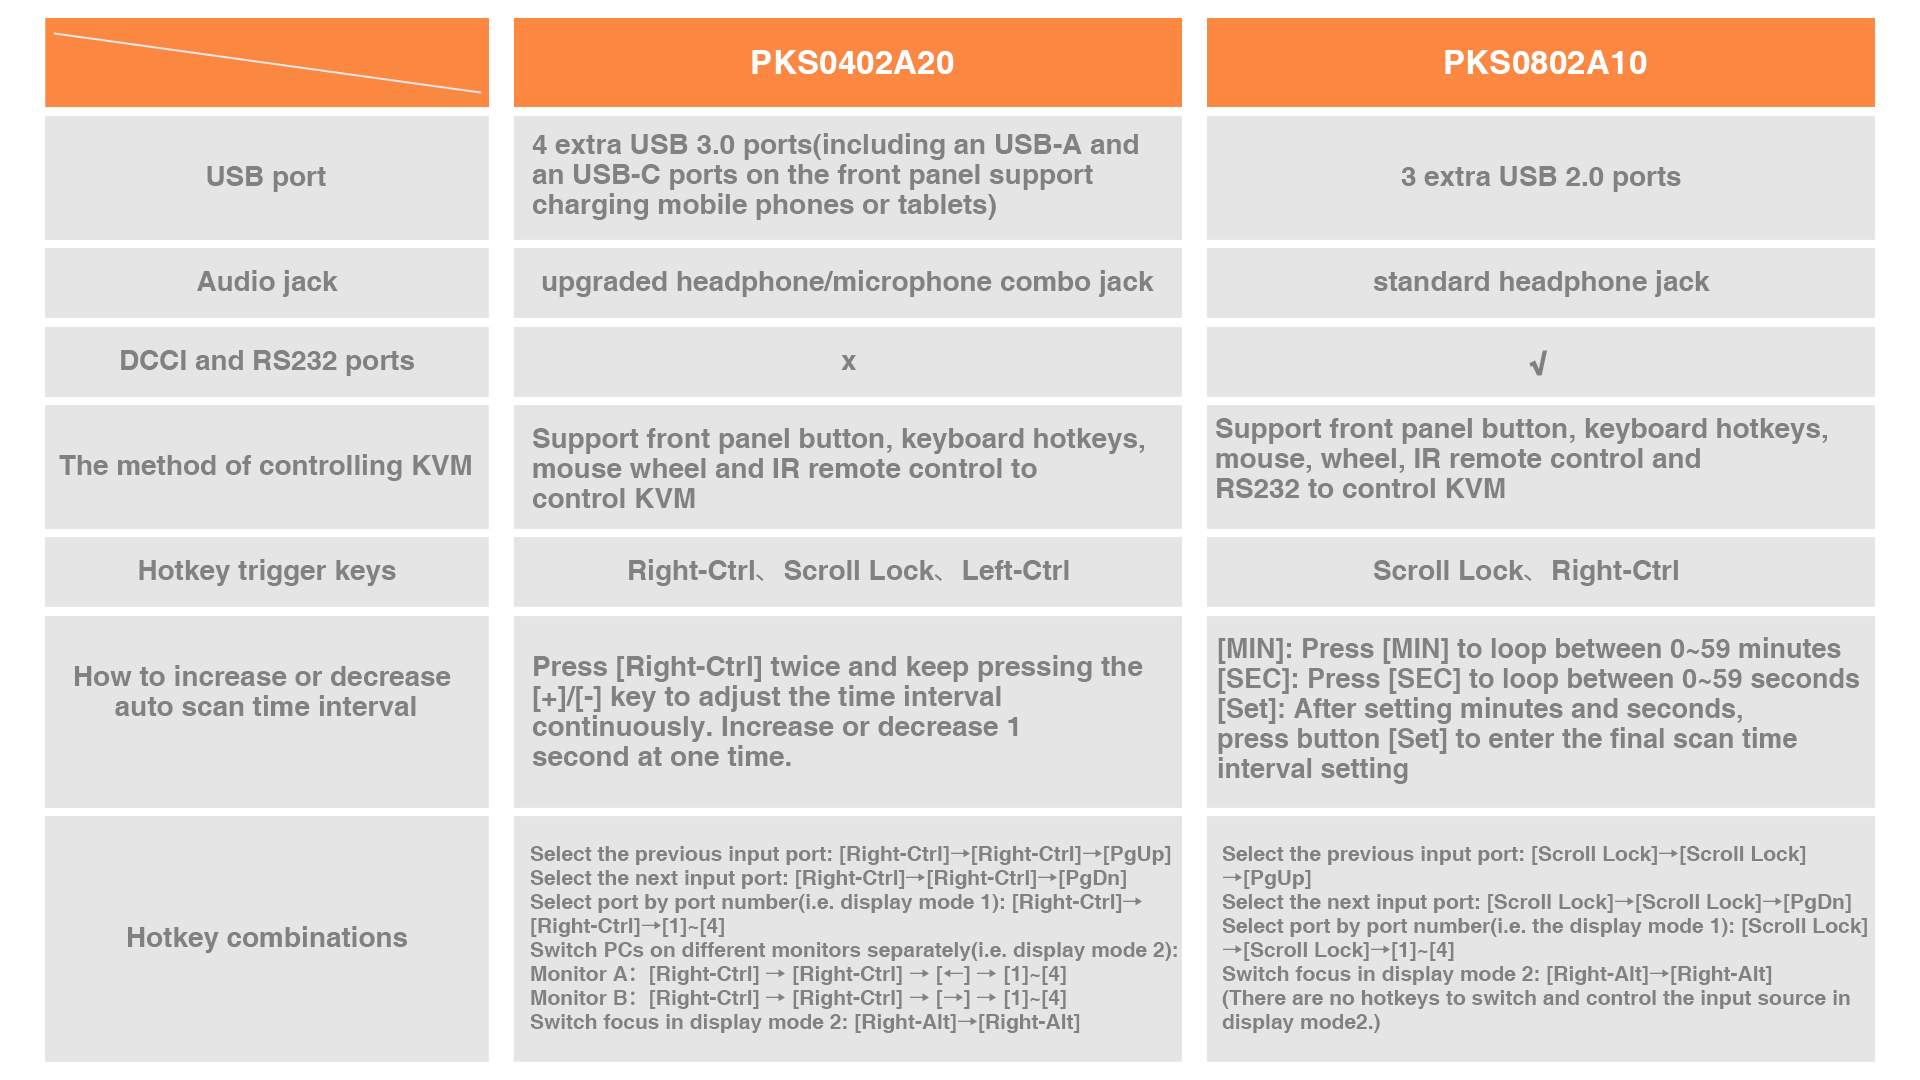 the differences between the PKS0402A20 and PKS0802A10.jpg